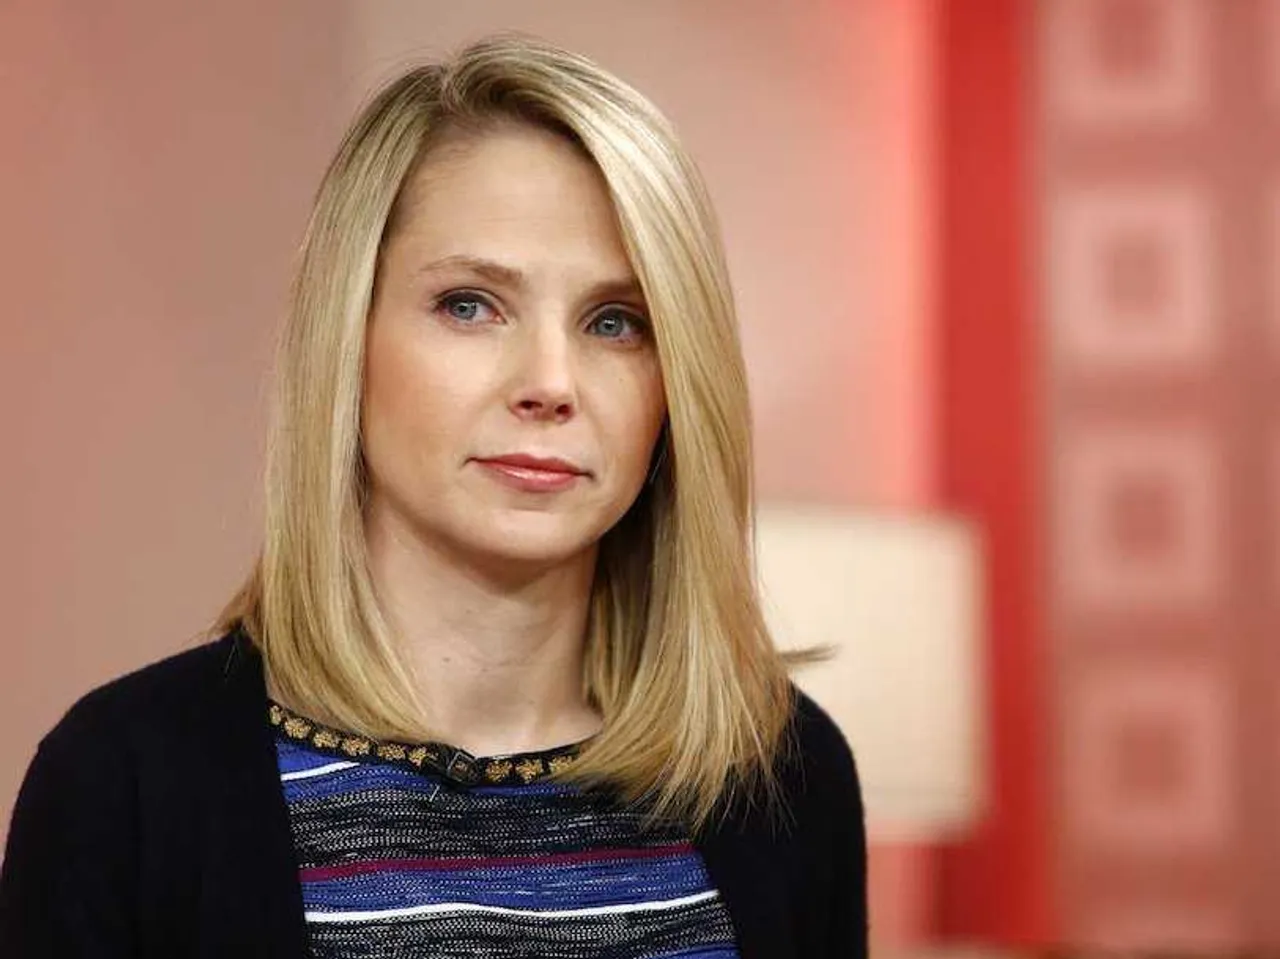 Marissa Mayer, CEO of Yahoo, pregnant with twin girls- won't affect her work 